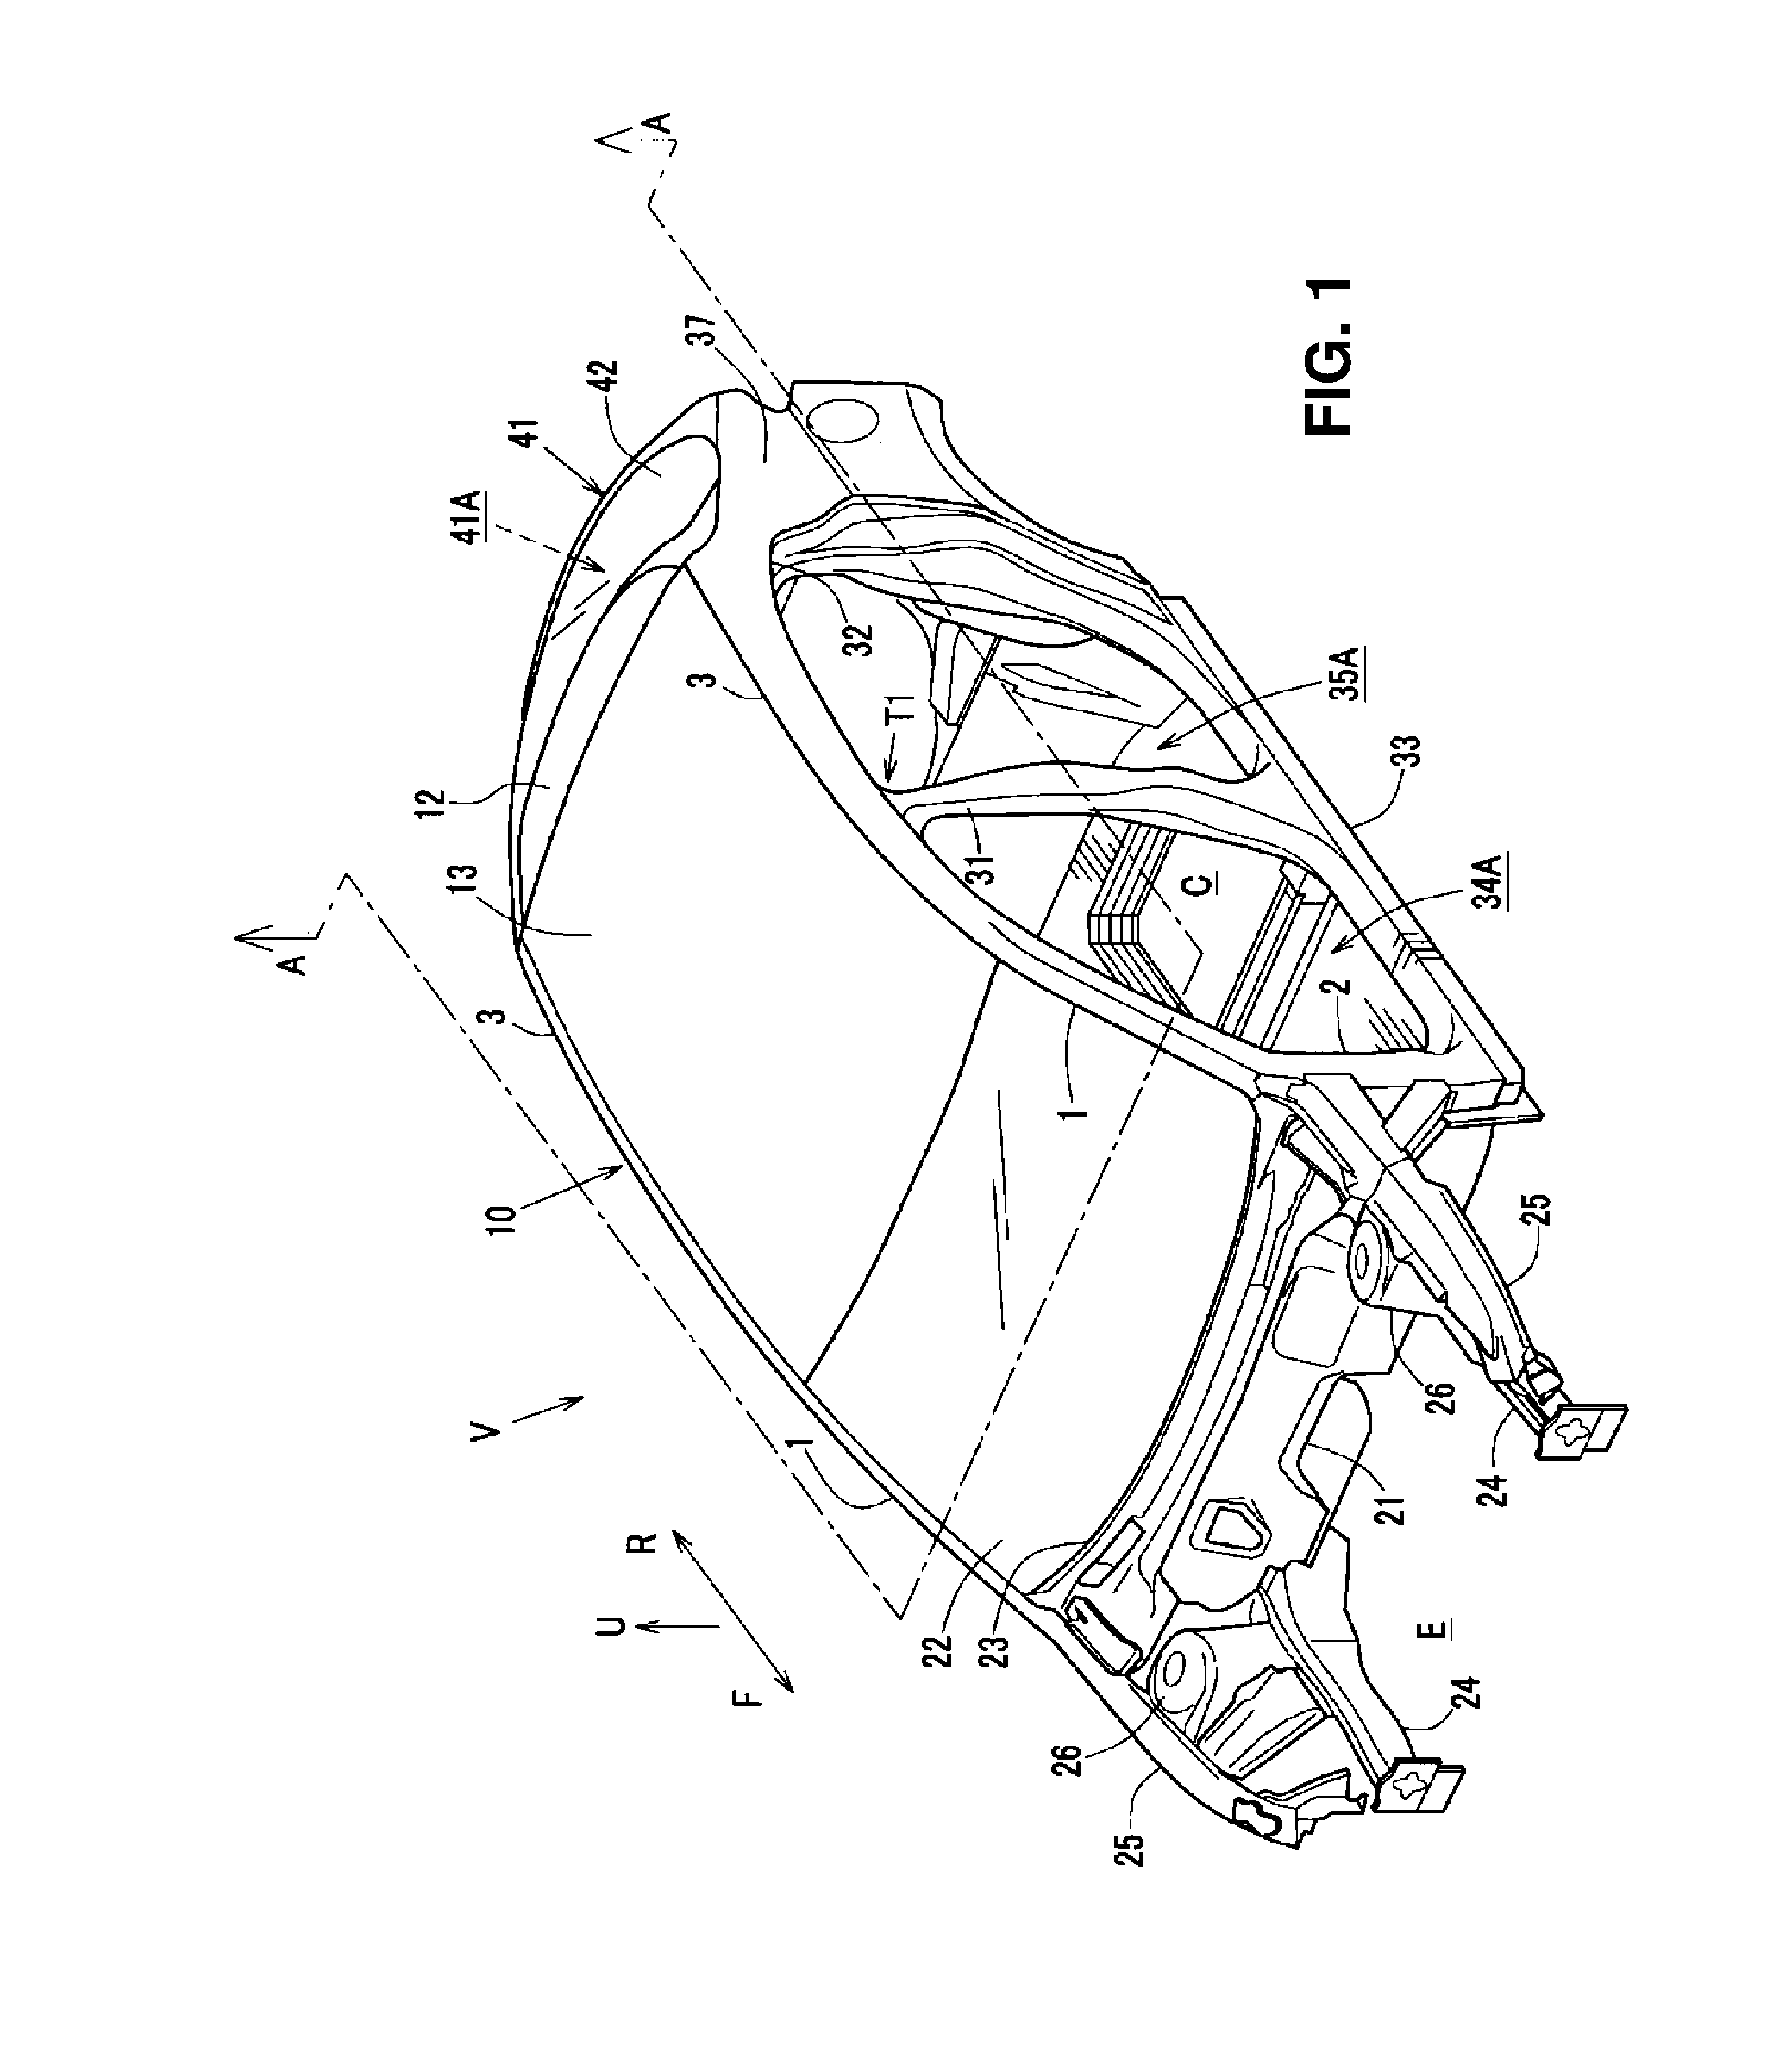 Upper vehicle-body structure of vehicle